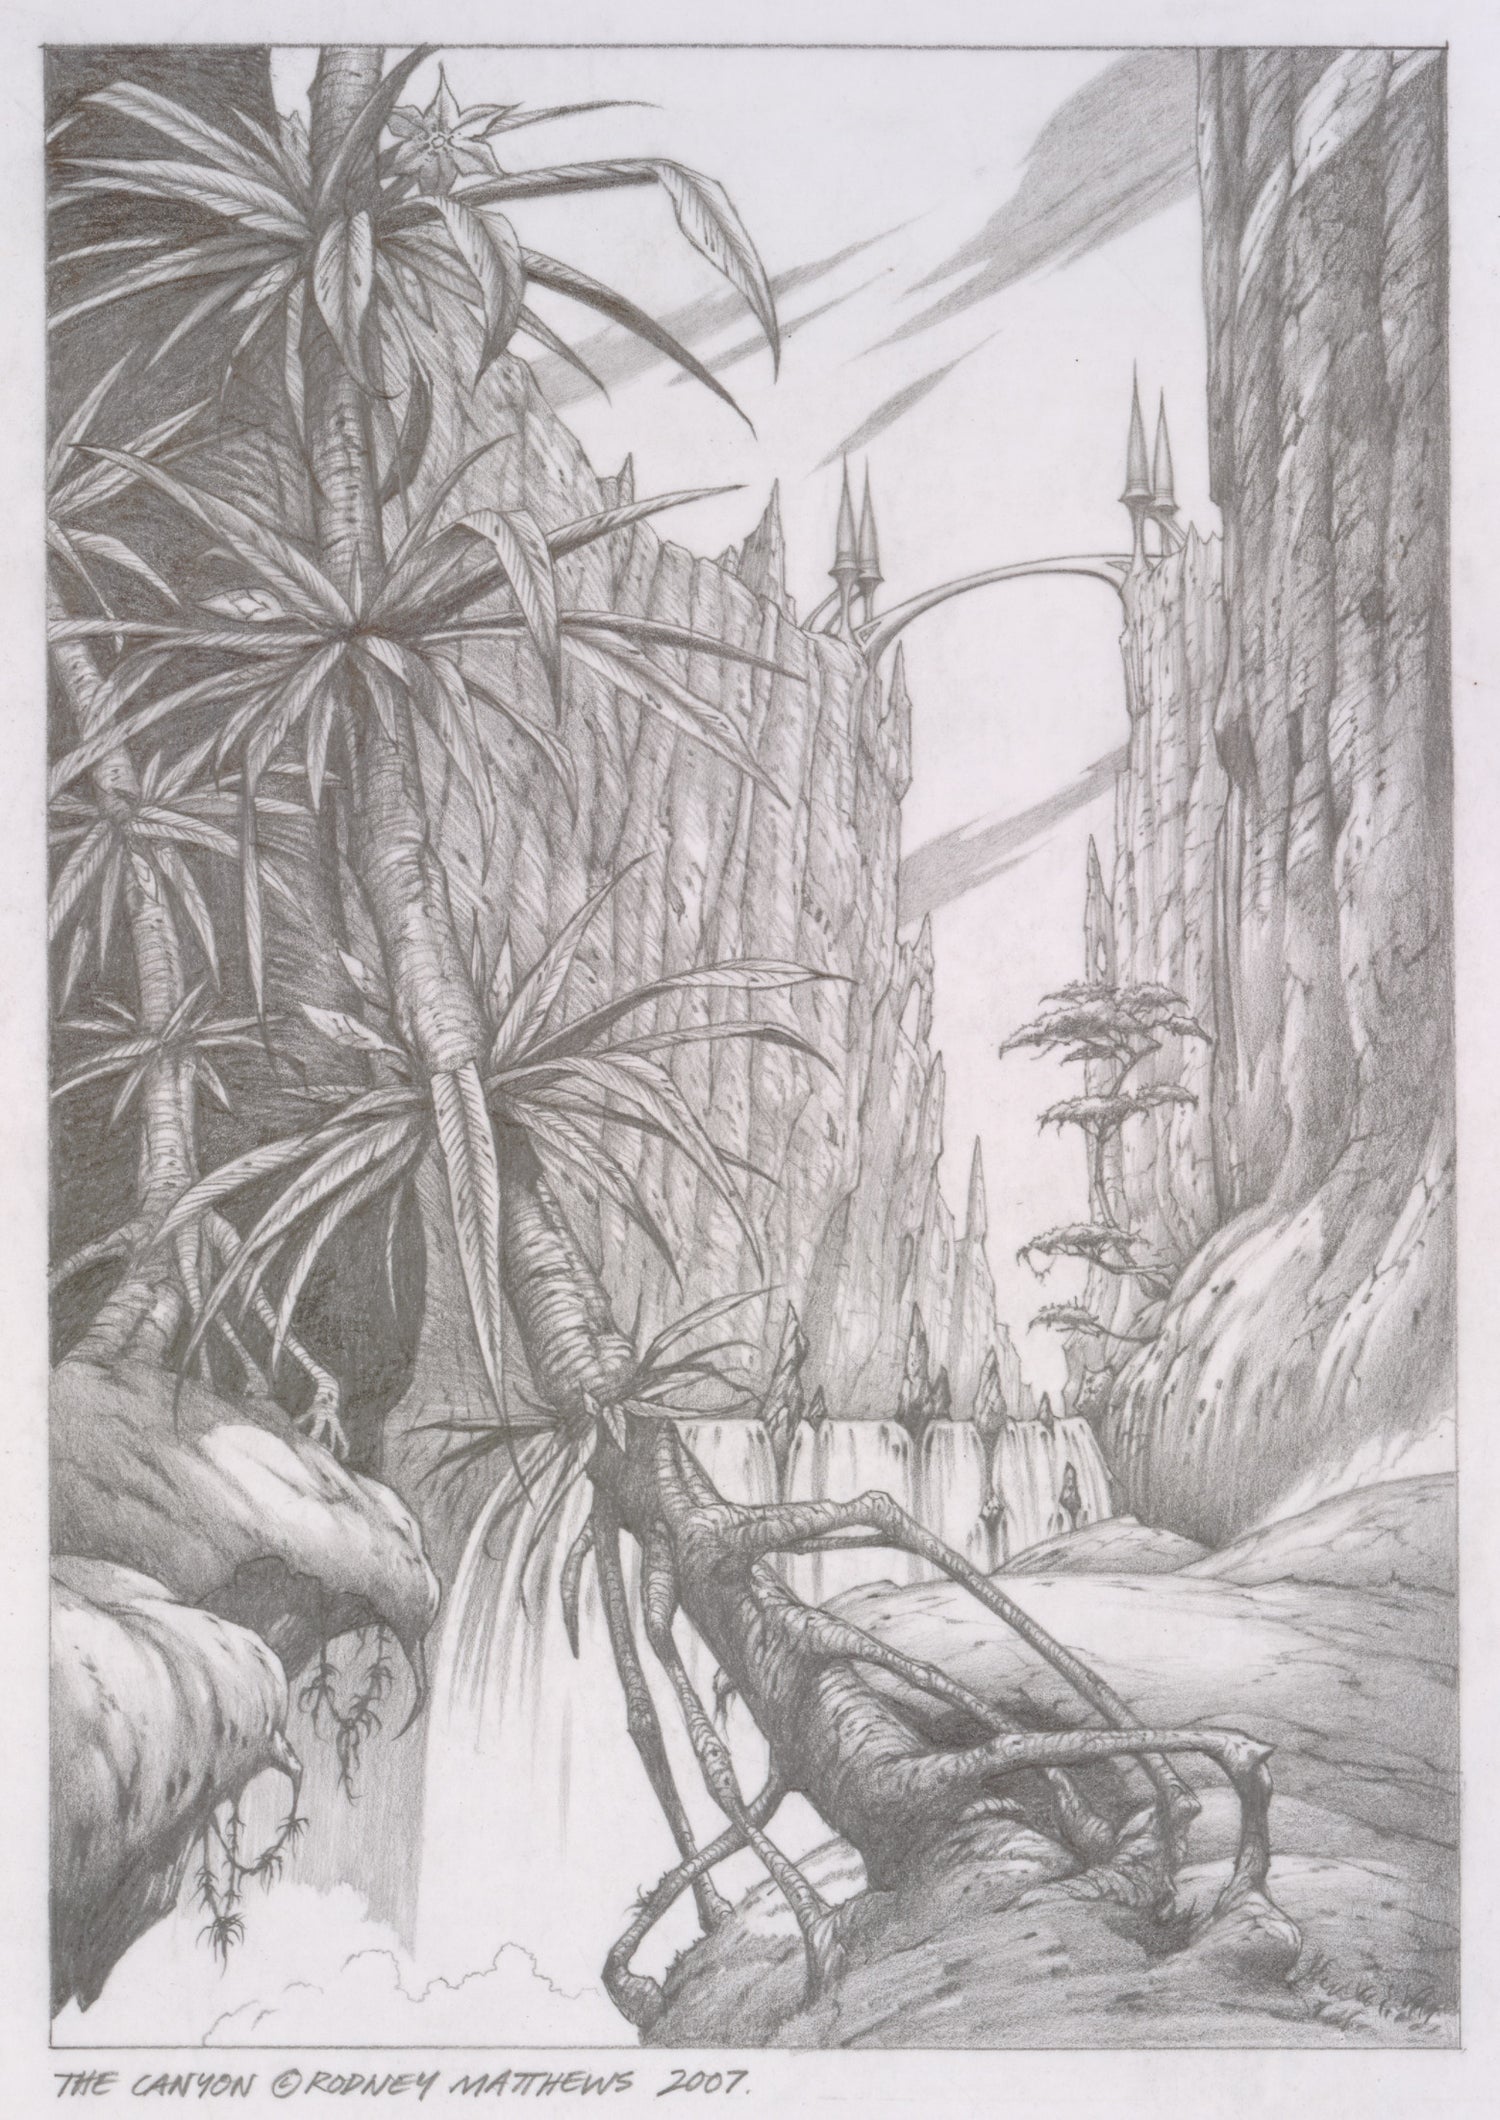 The Canyon (World of Illusions) original pencil sketch by Rodney Matthews